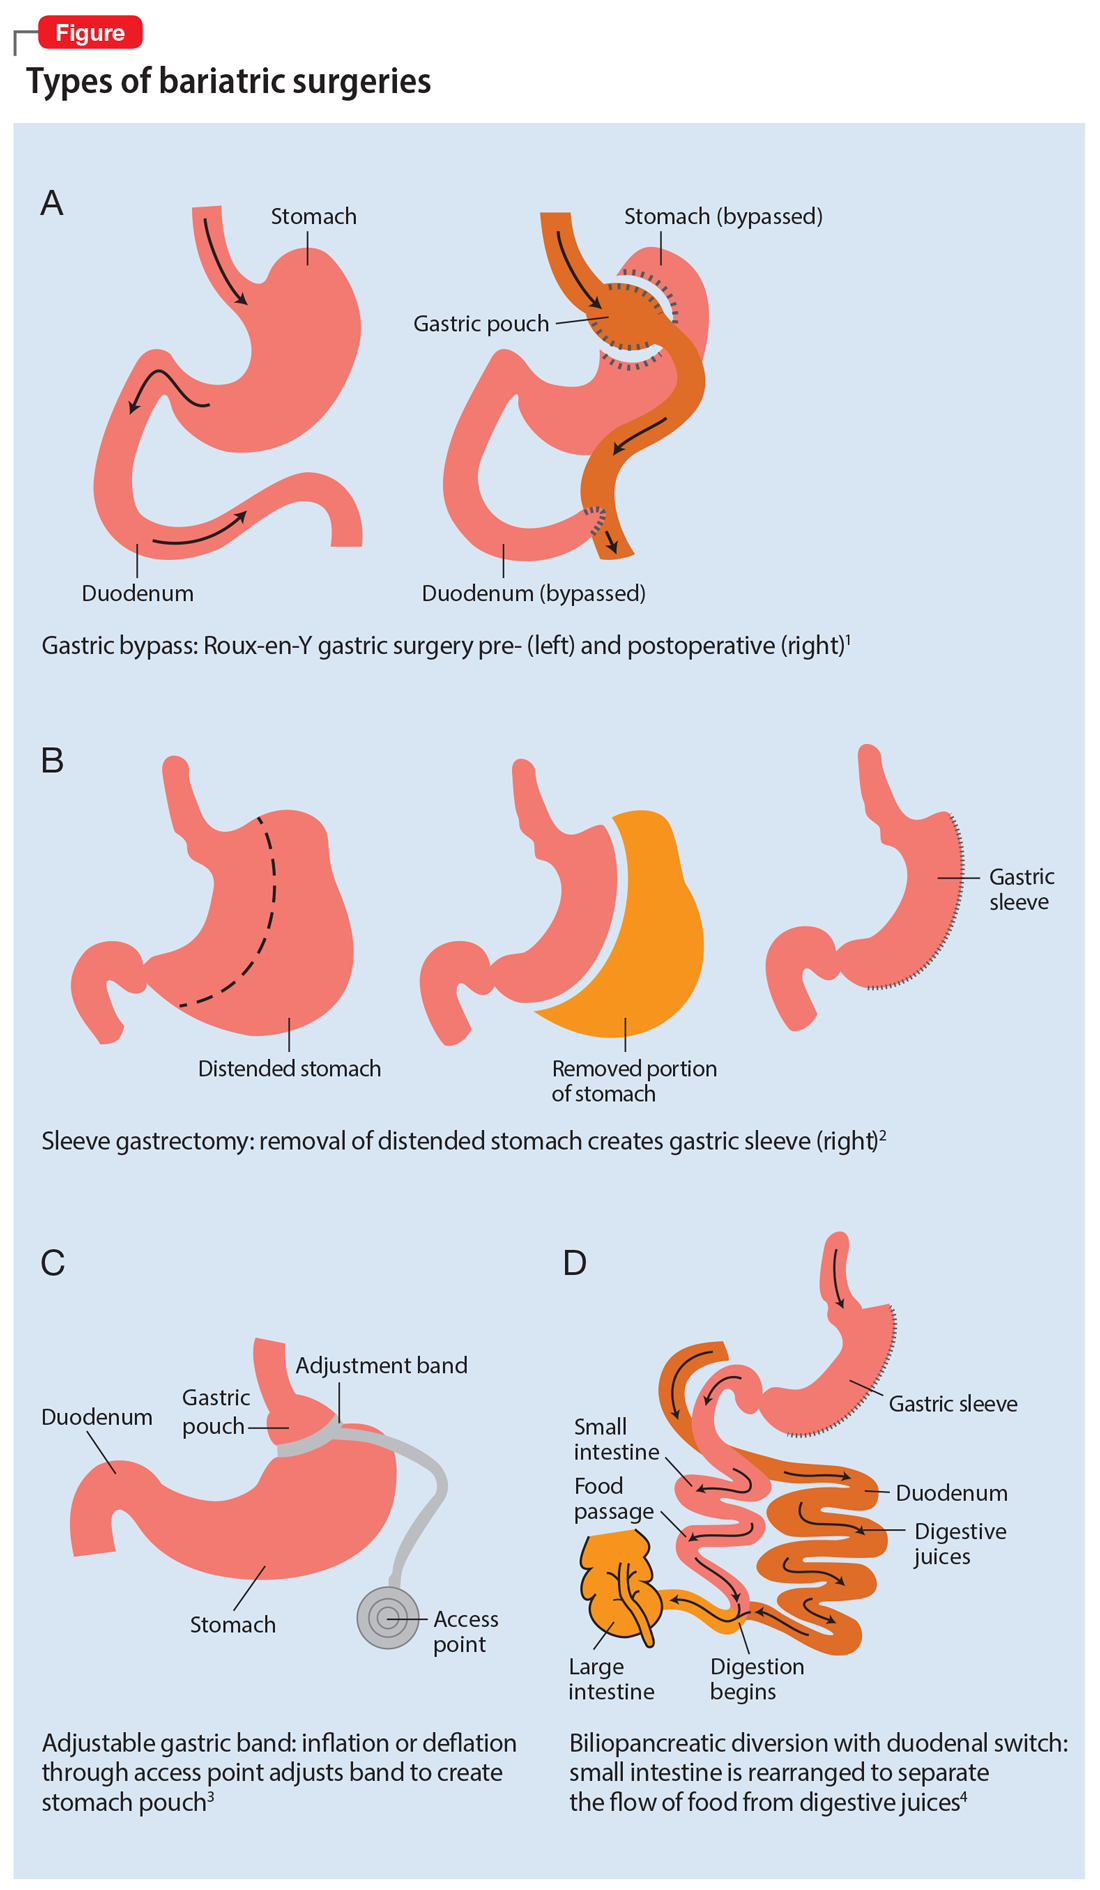 Types of bariatric surgeries